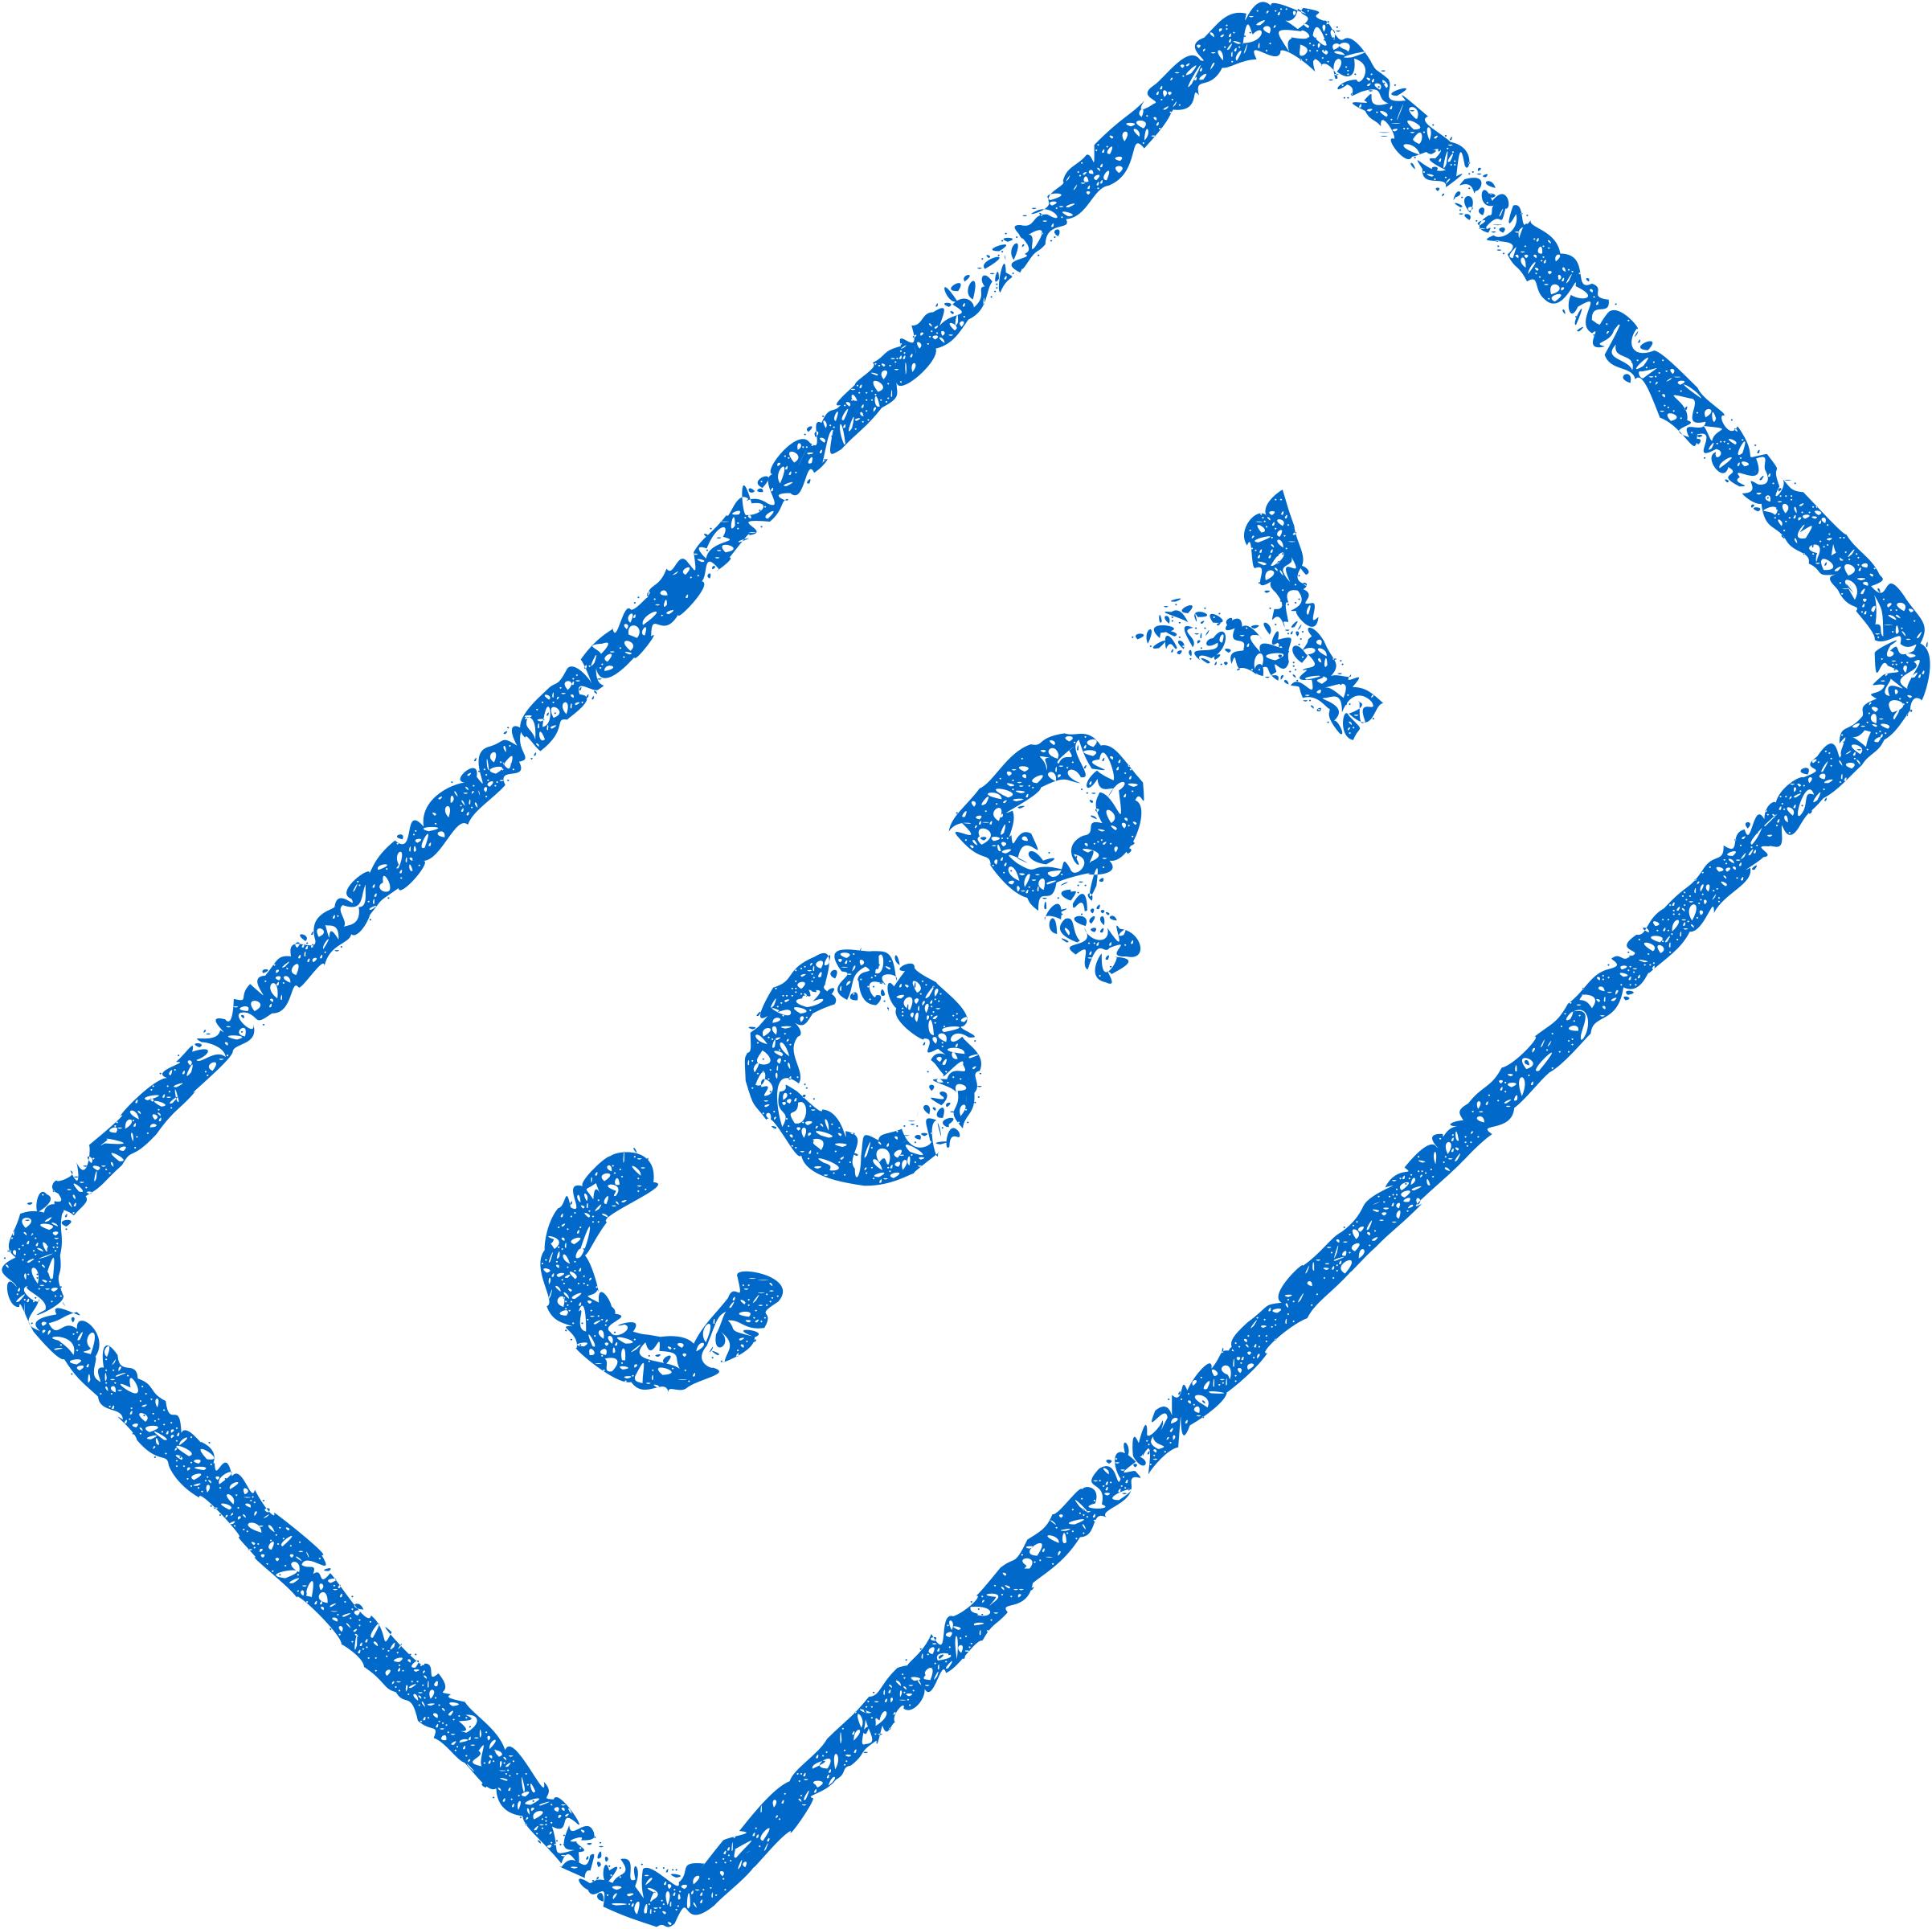 Copy Business Stamp 2 PNG icons